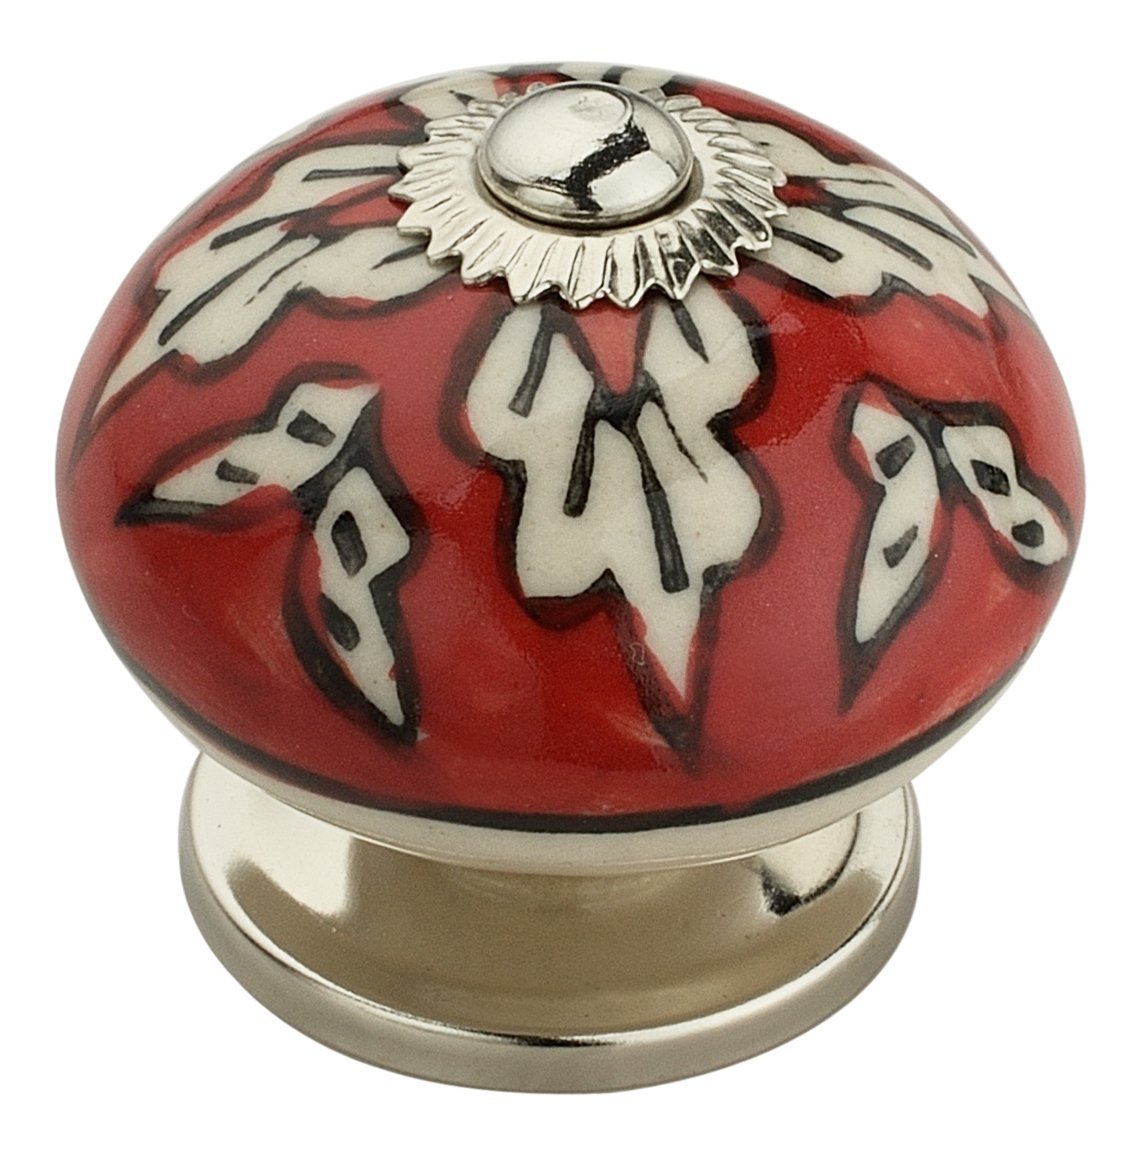 Ck312 1.6 In. Leaf On Red Cabinet Knob, White & Red - Pack Of 5